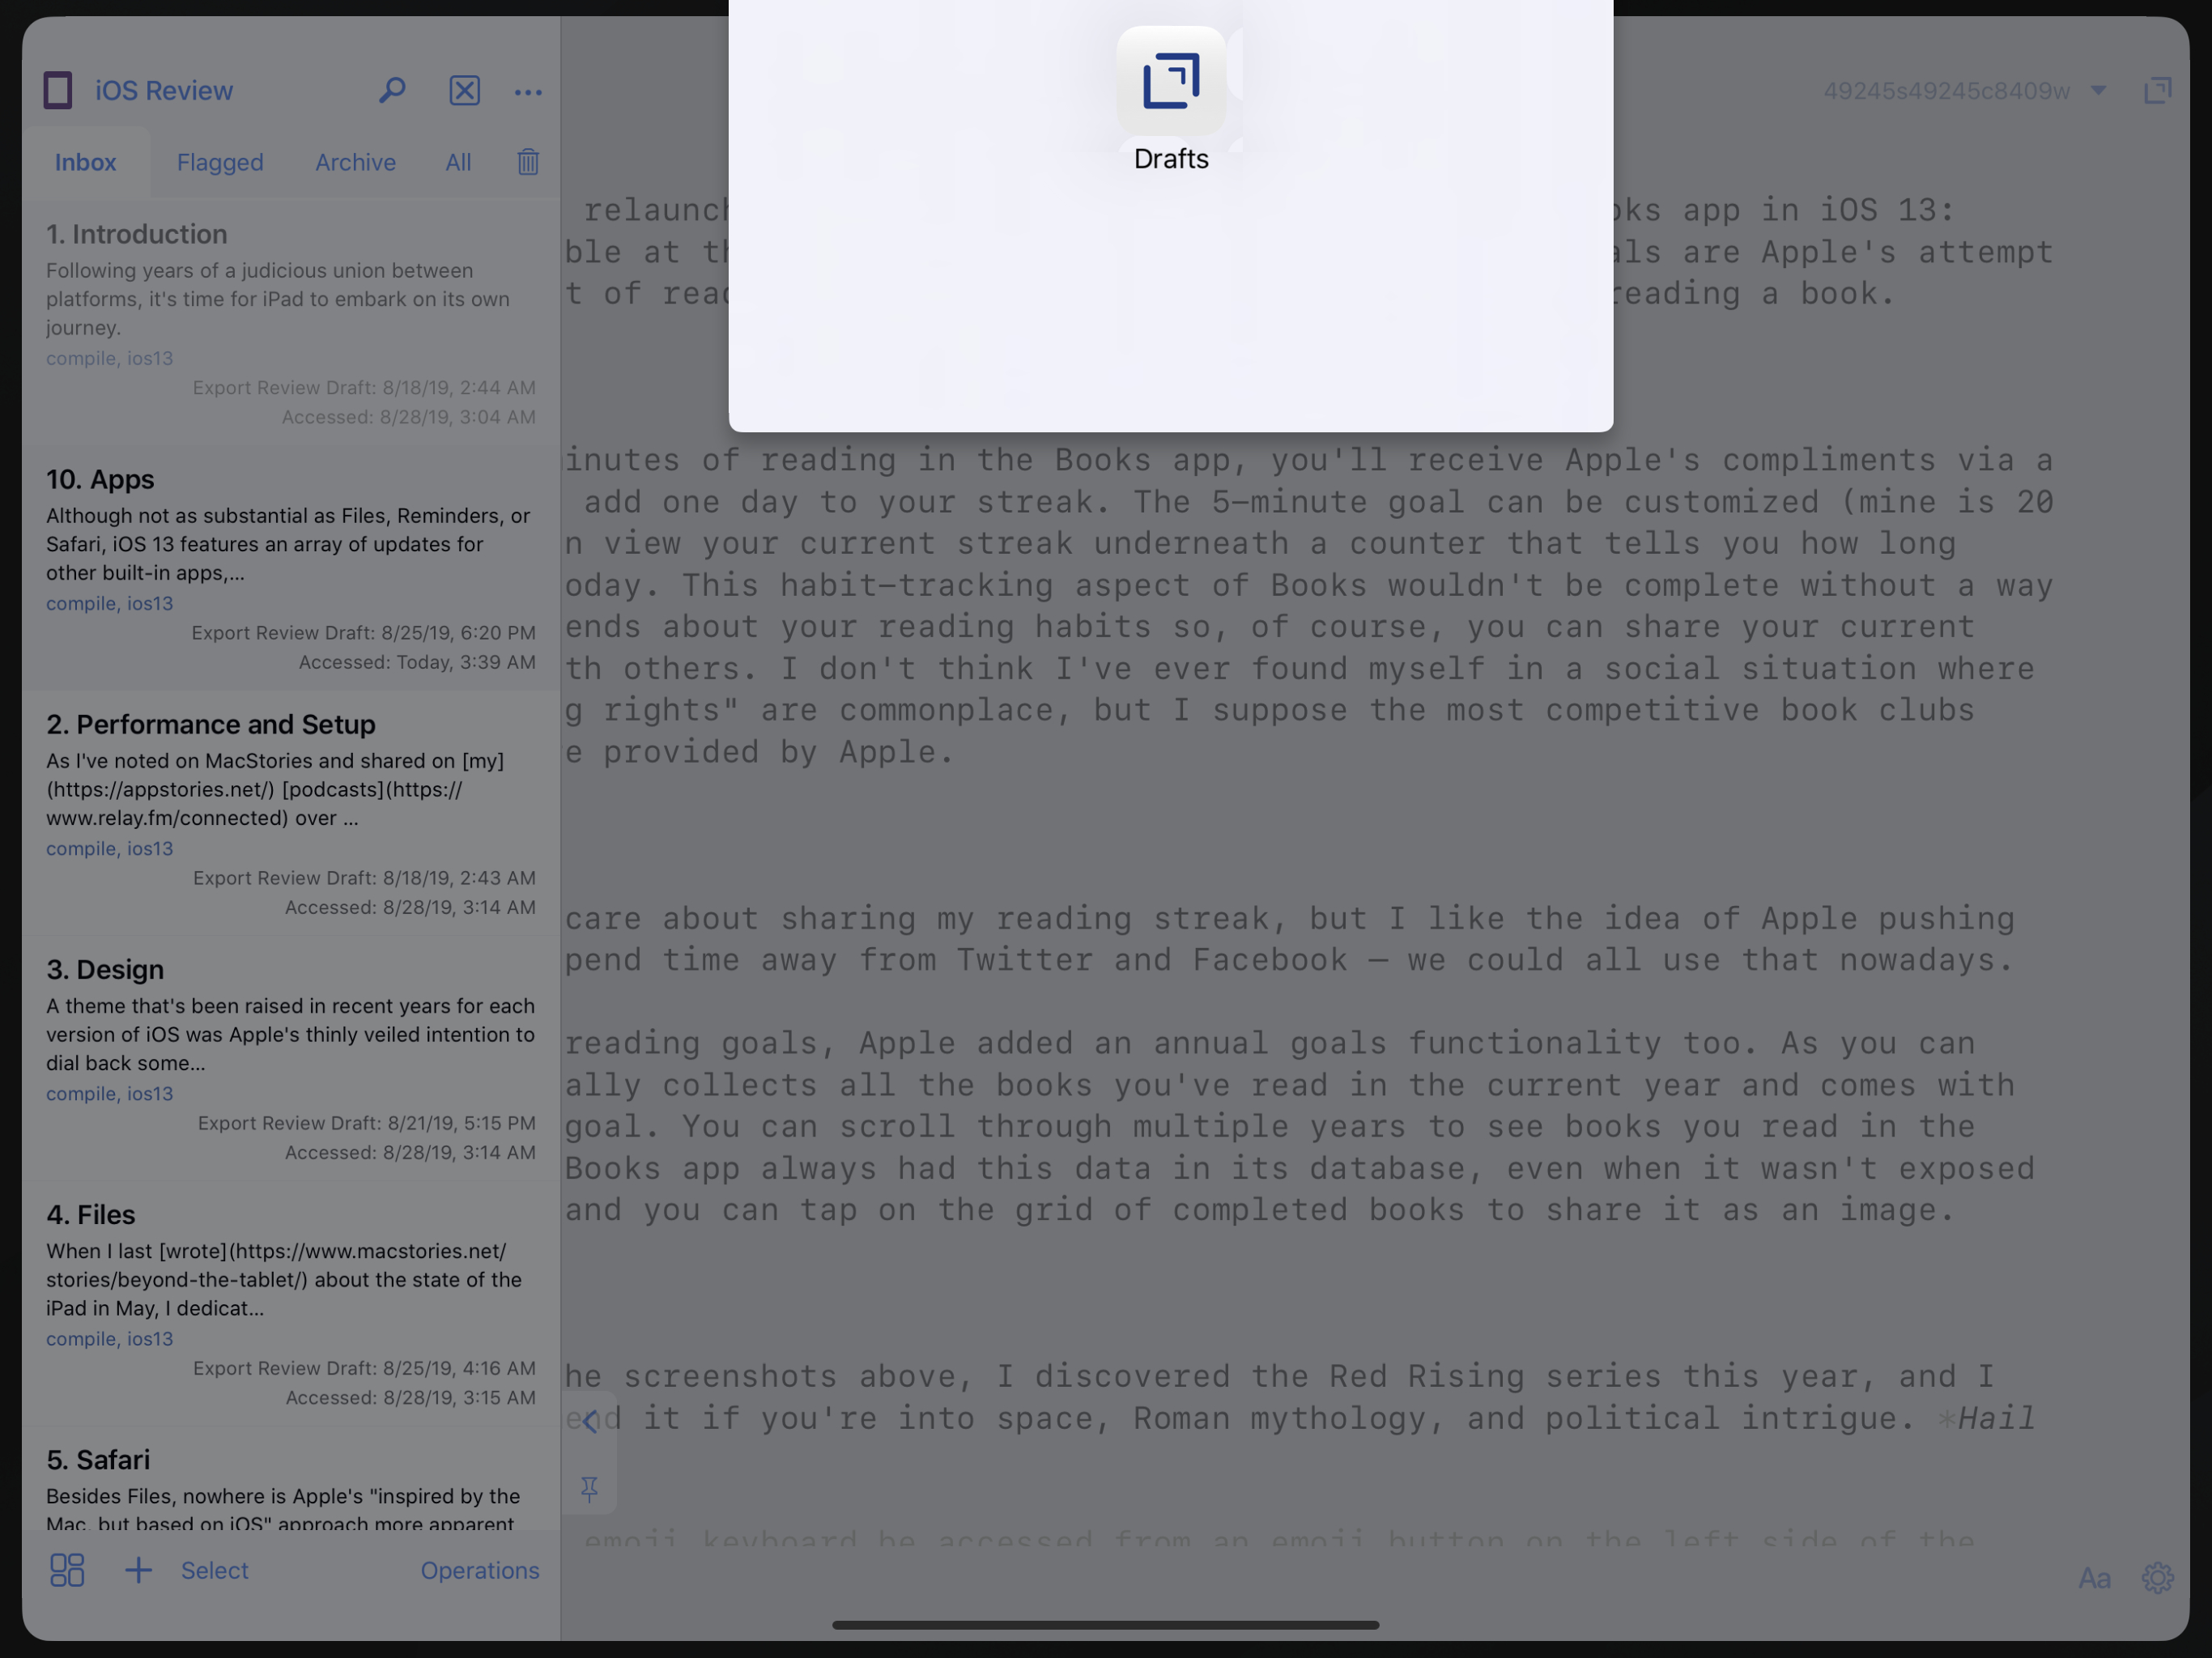 Drafts' latest version supports multiwindow on iPadOS.